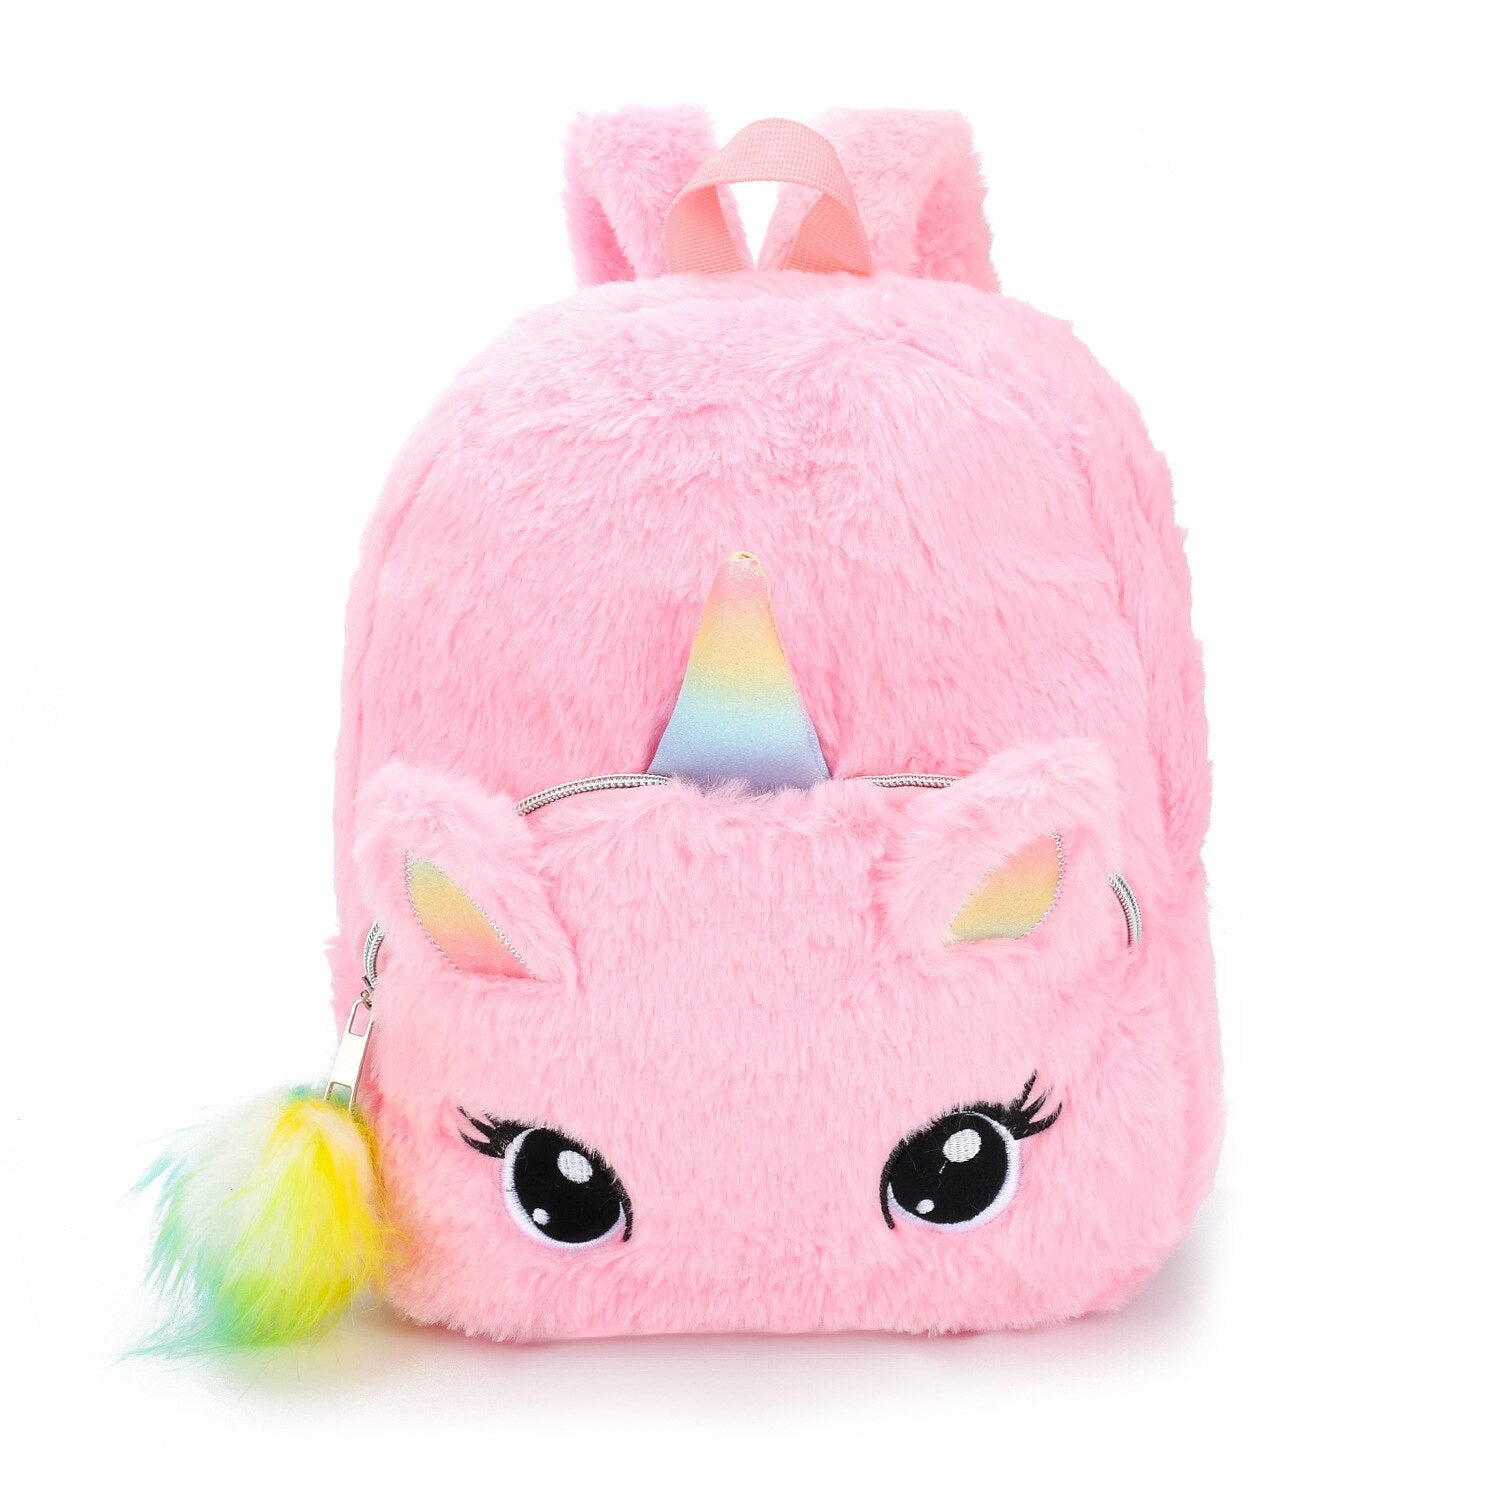 3D Lightweight Unicorn School Backpack for Girls - Pink & Blue Baby Shop - Review